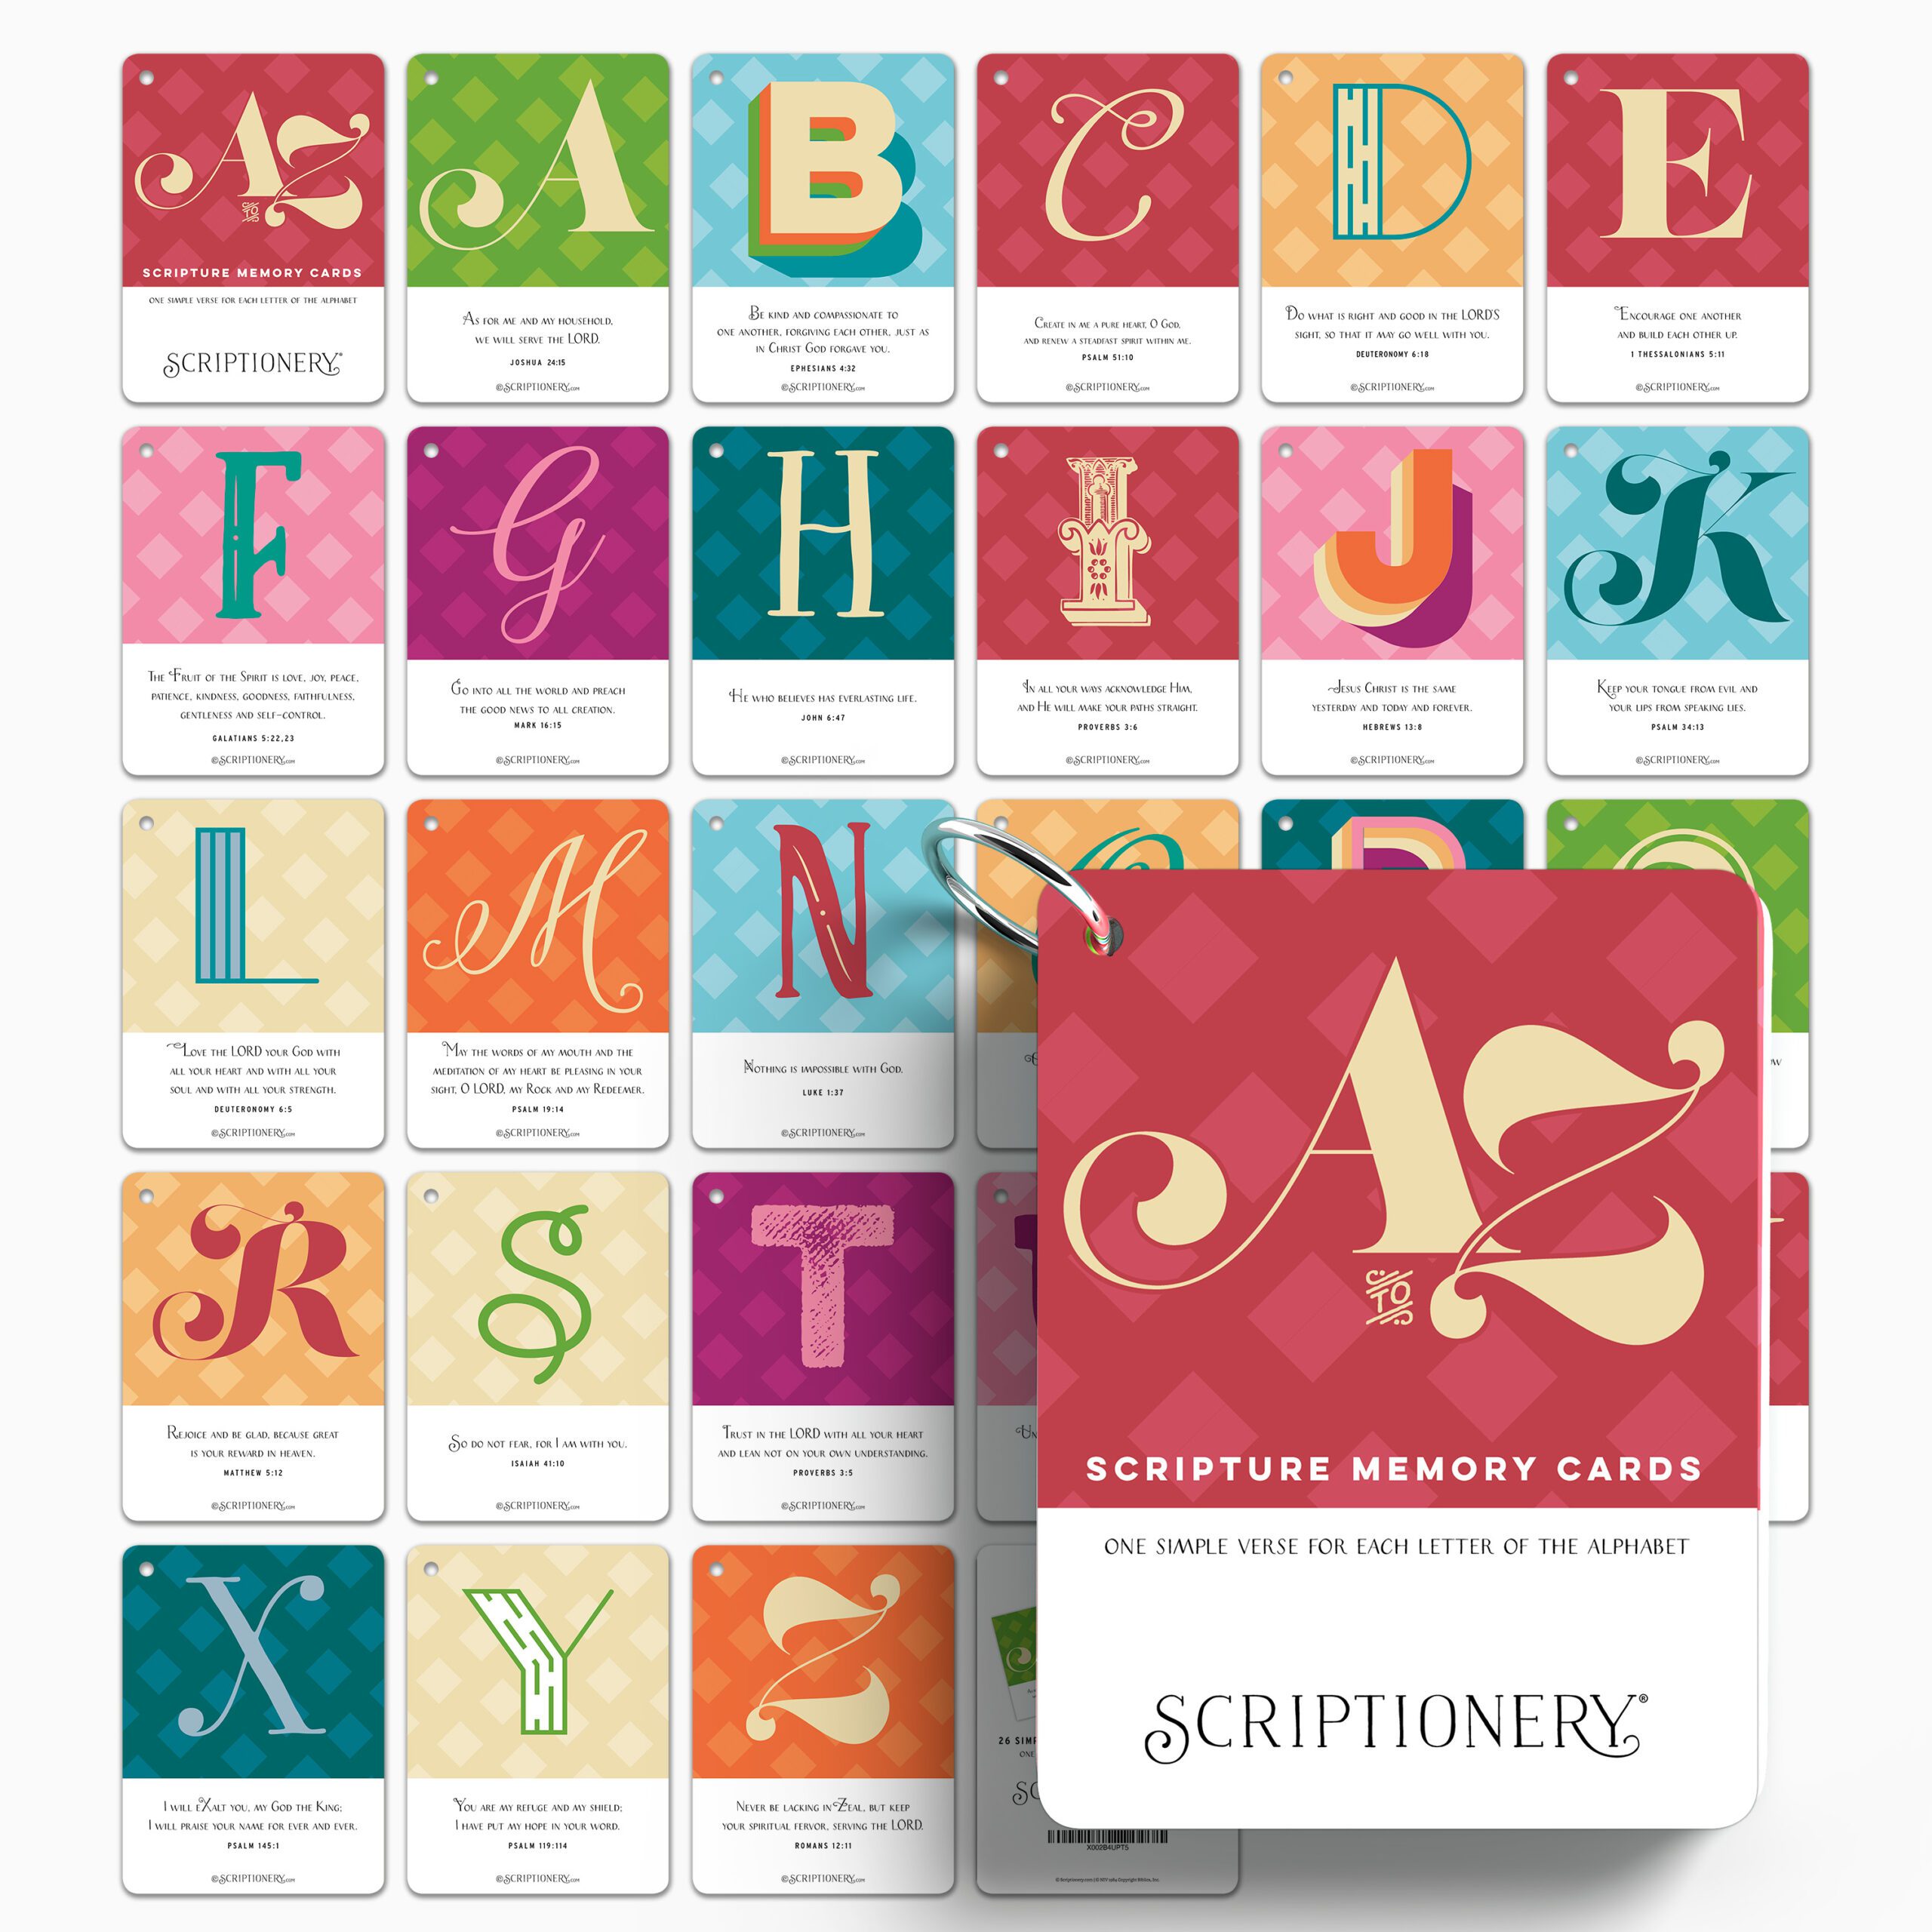 A to Z ABC Scripture Card Flashcards